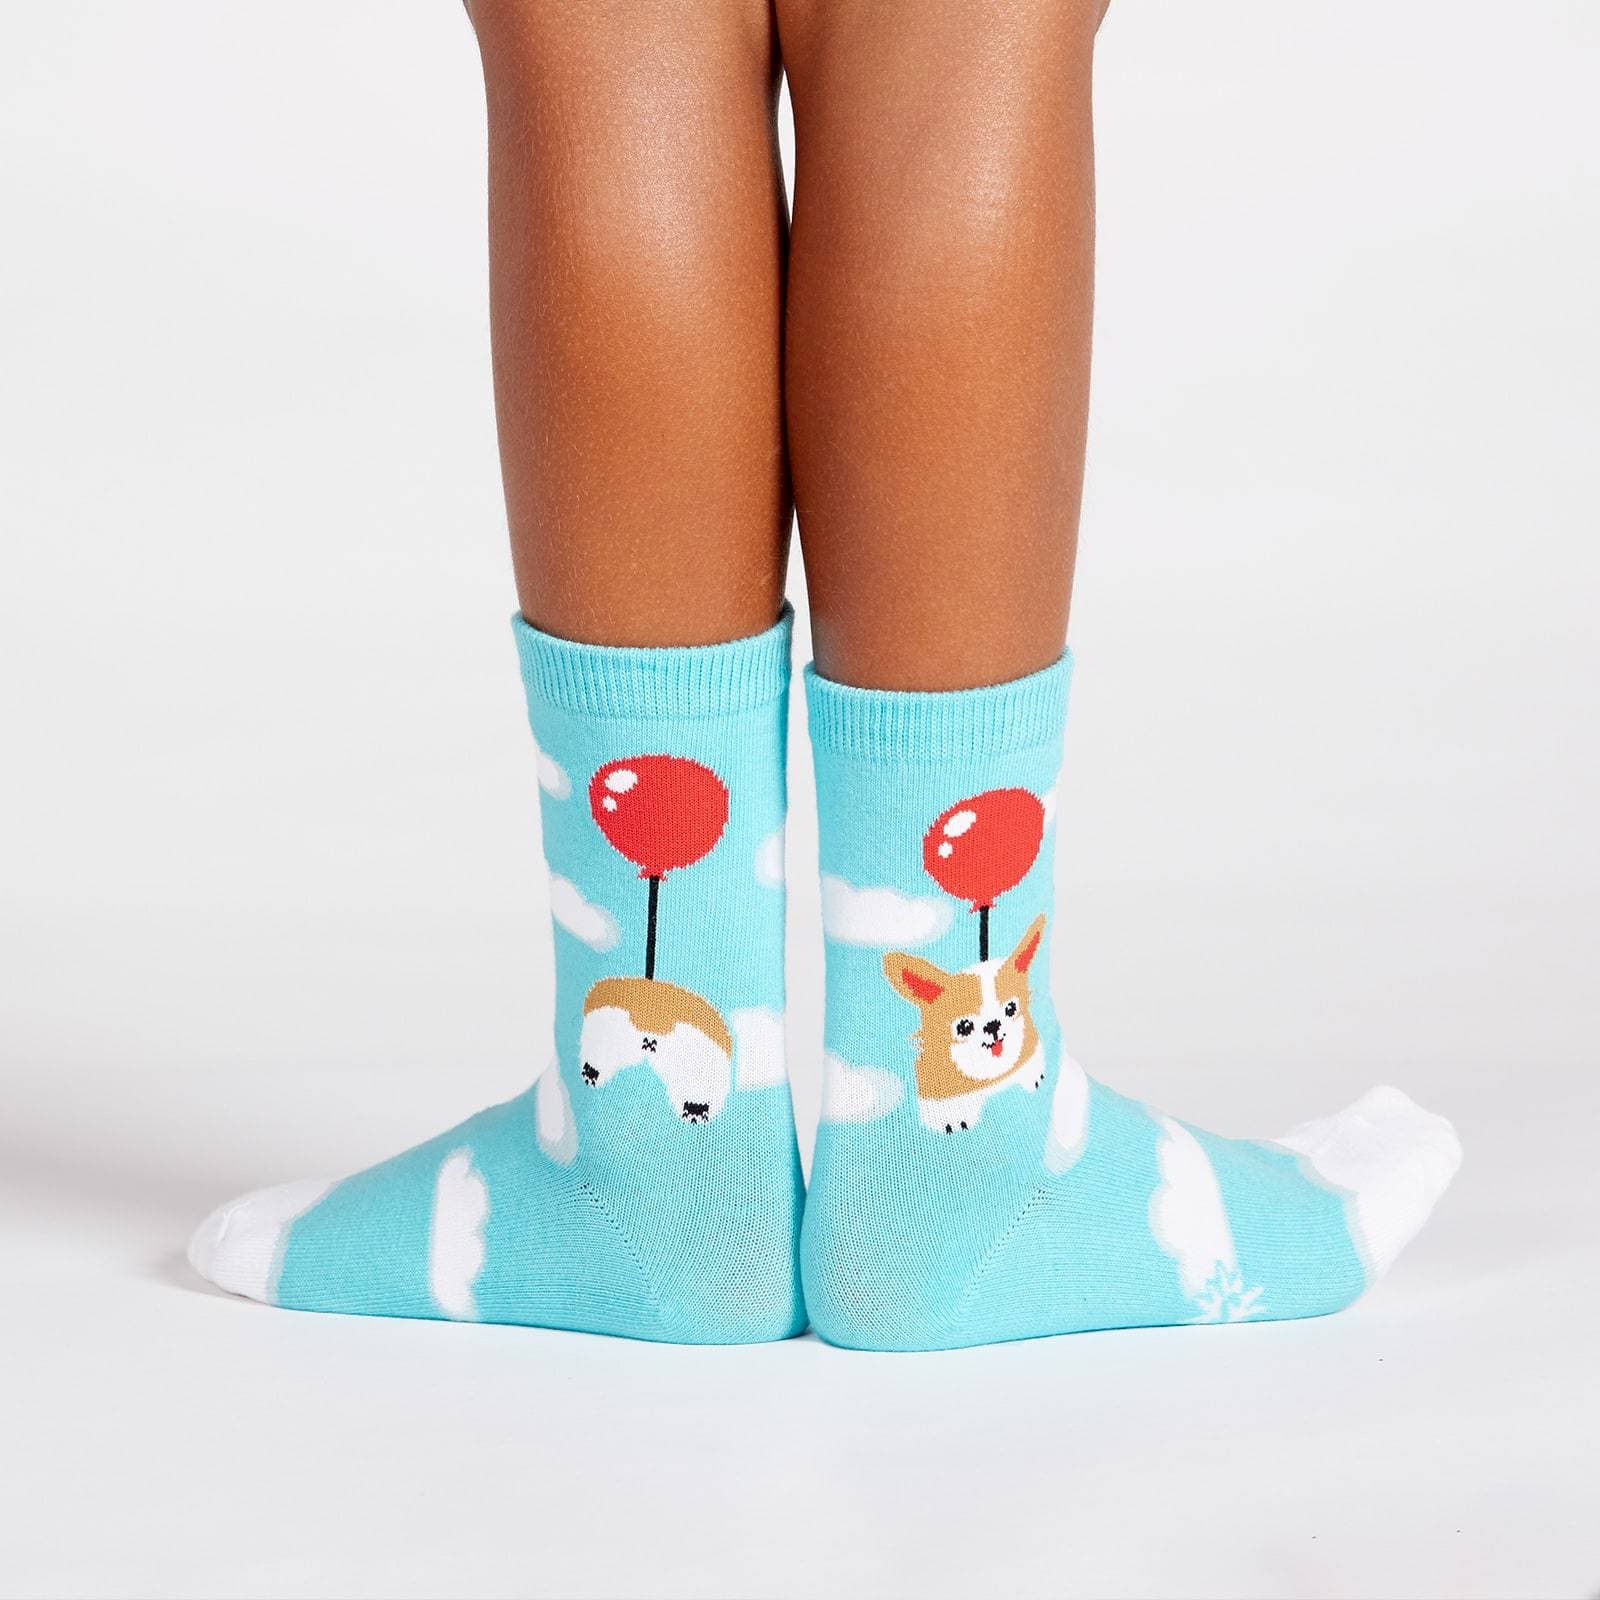 Pup Pup and Away Kid's Crew Socks (Ages 7-10)